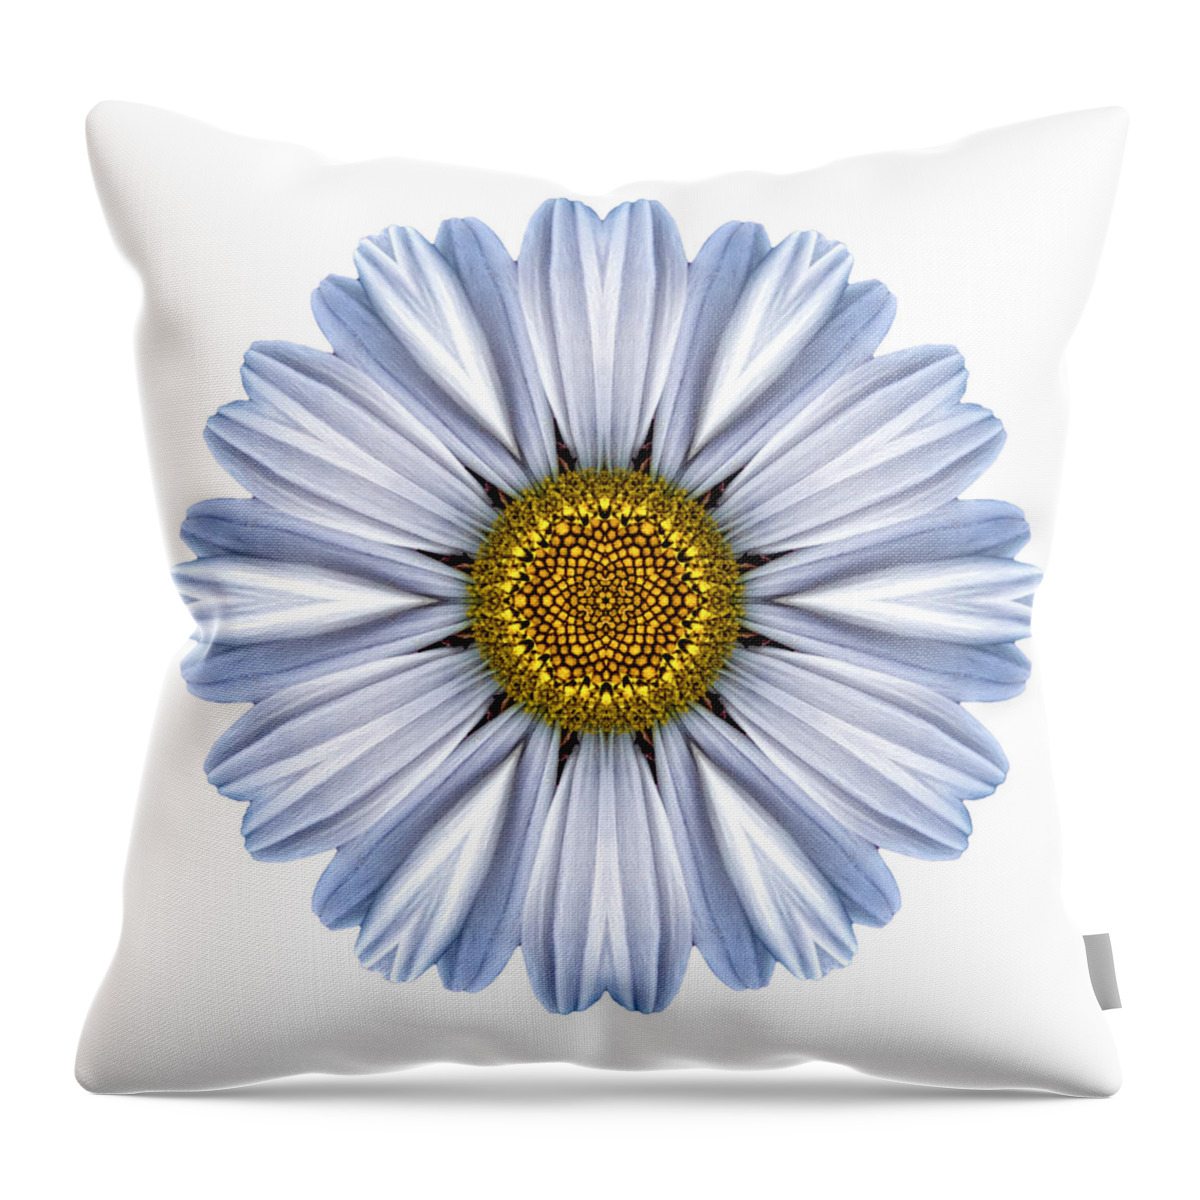 Flower Throw Pillow featuring the photograph White Daisy I Flower Mandala White by David J Bookbinder